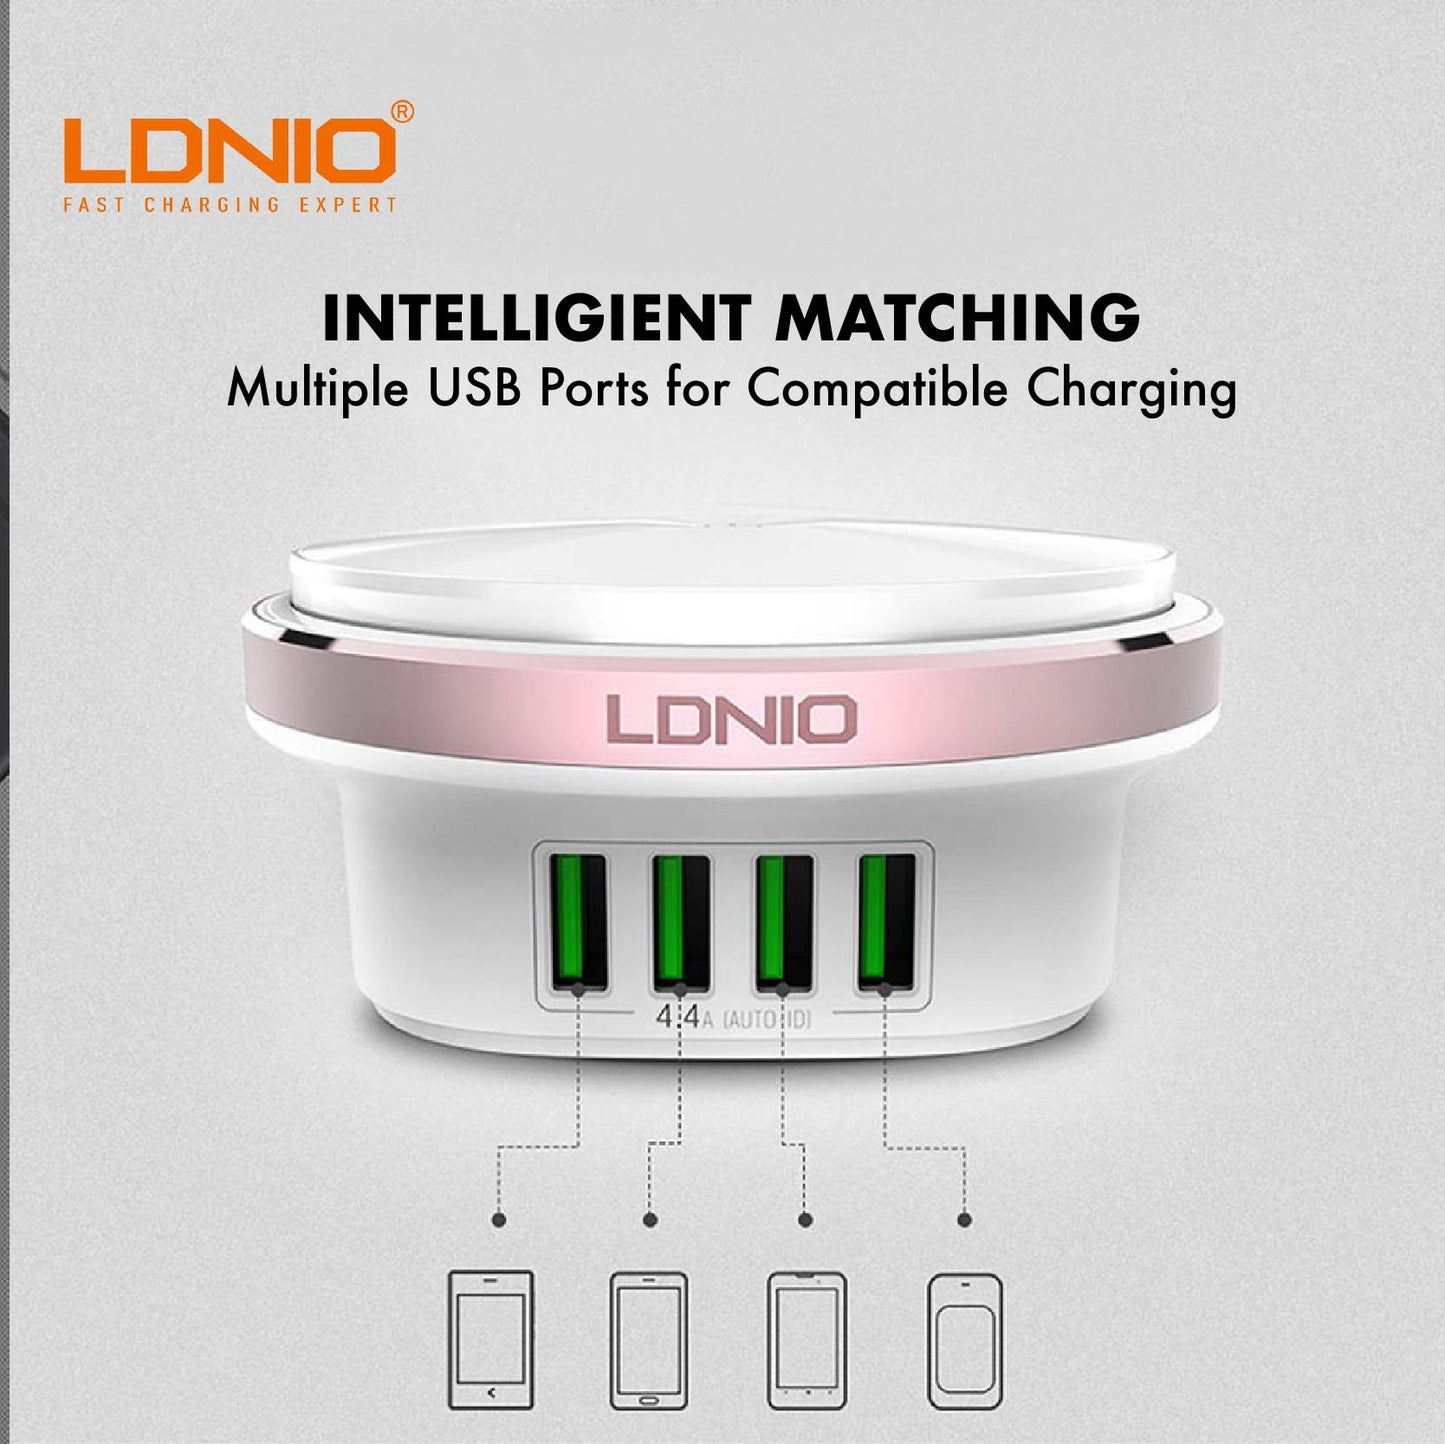 LDNIO A4406 LED Power Press Lamp Auto-ID 4 USB Ports 4.4A Charger For Mobile Phone